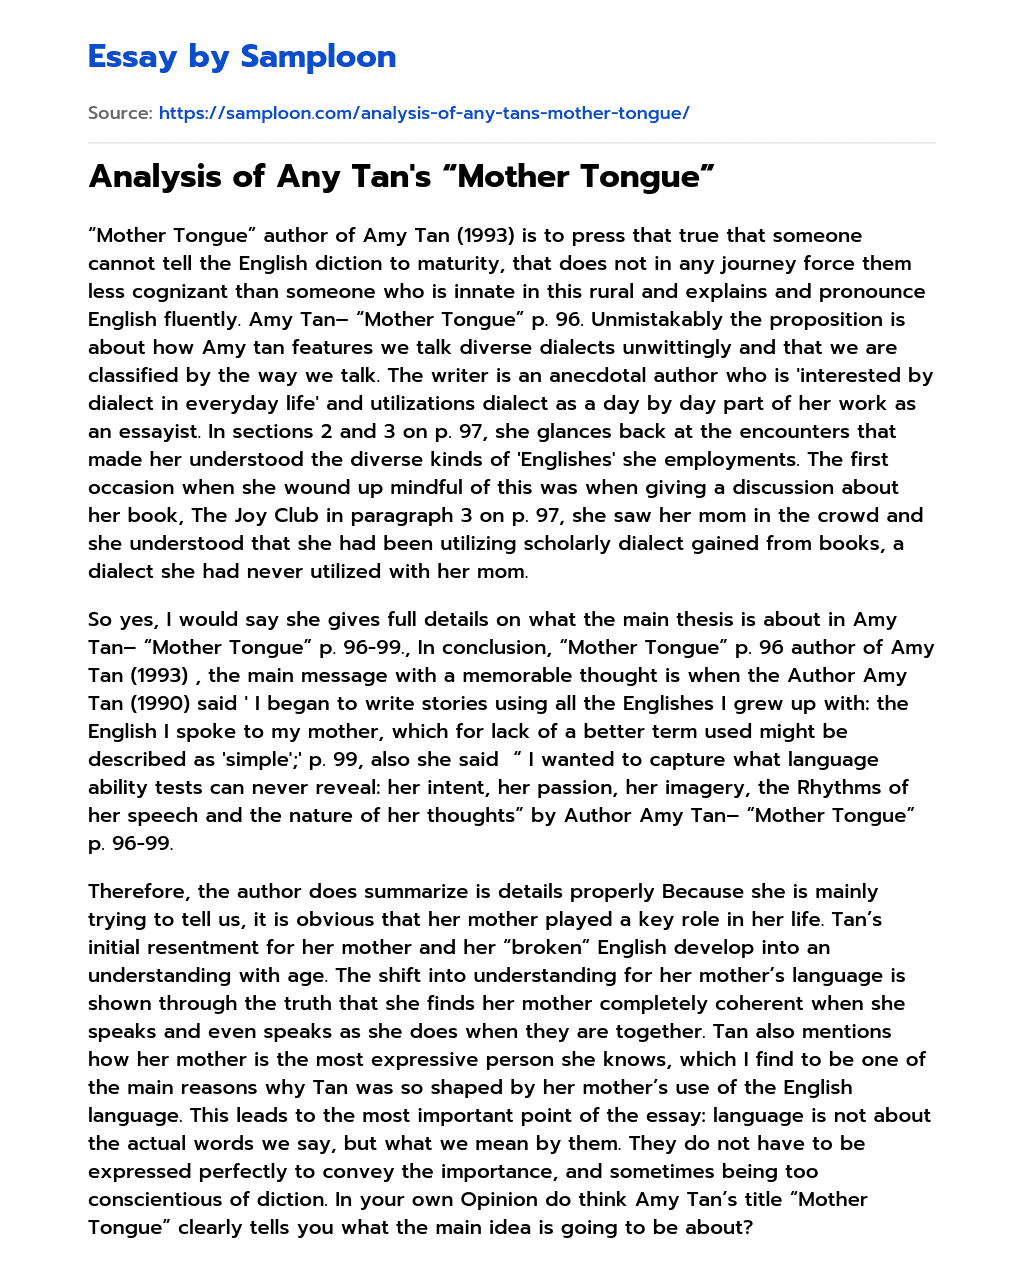 Analysis of Any Tan’s “Mother Tongue” essay